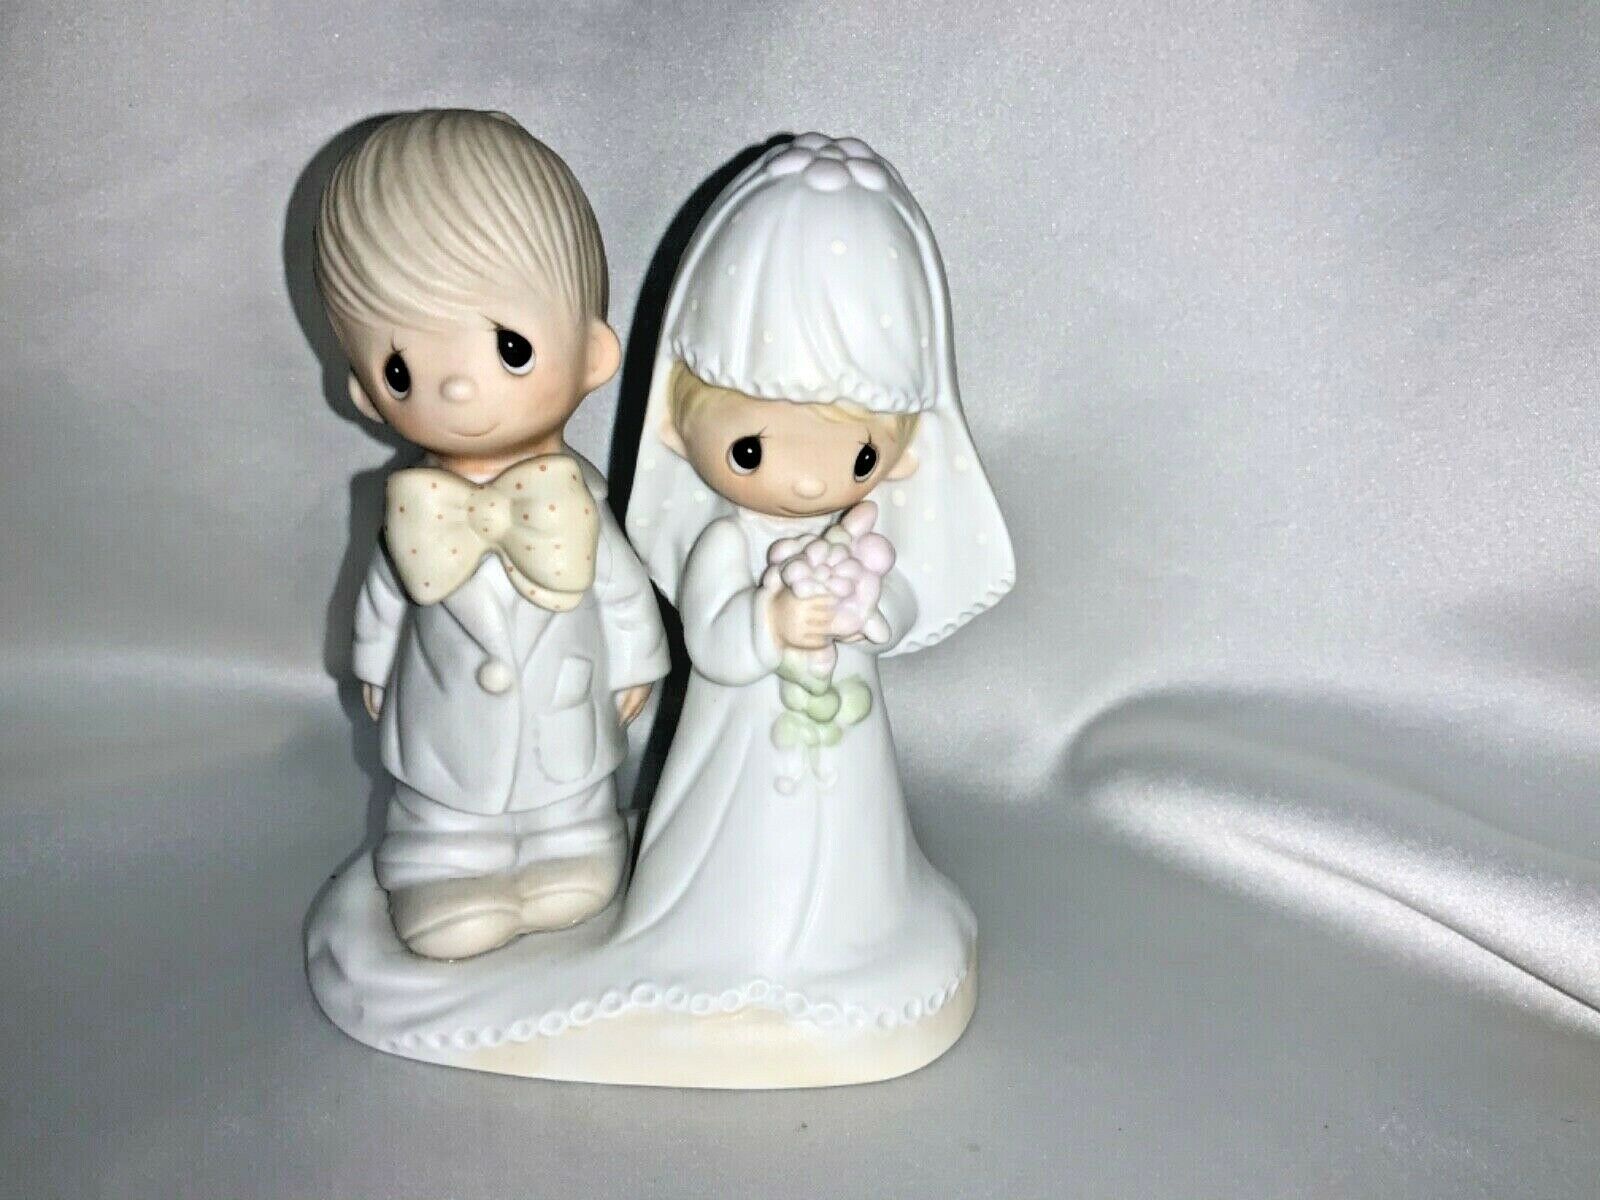 Primary image for 1979 Precious Moments The Lord Bless You and Keep You Figurine E-3114